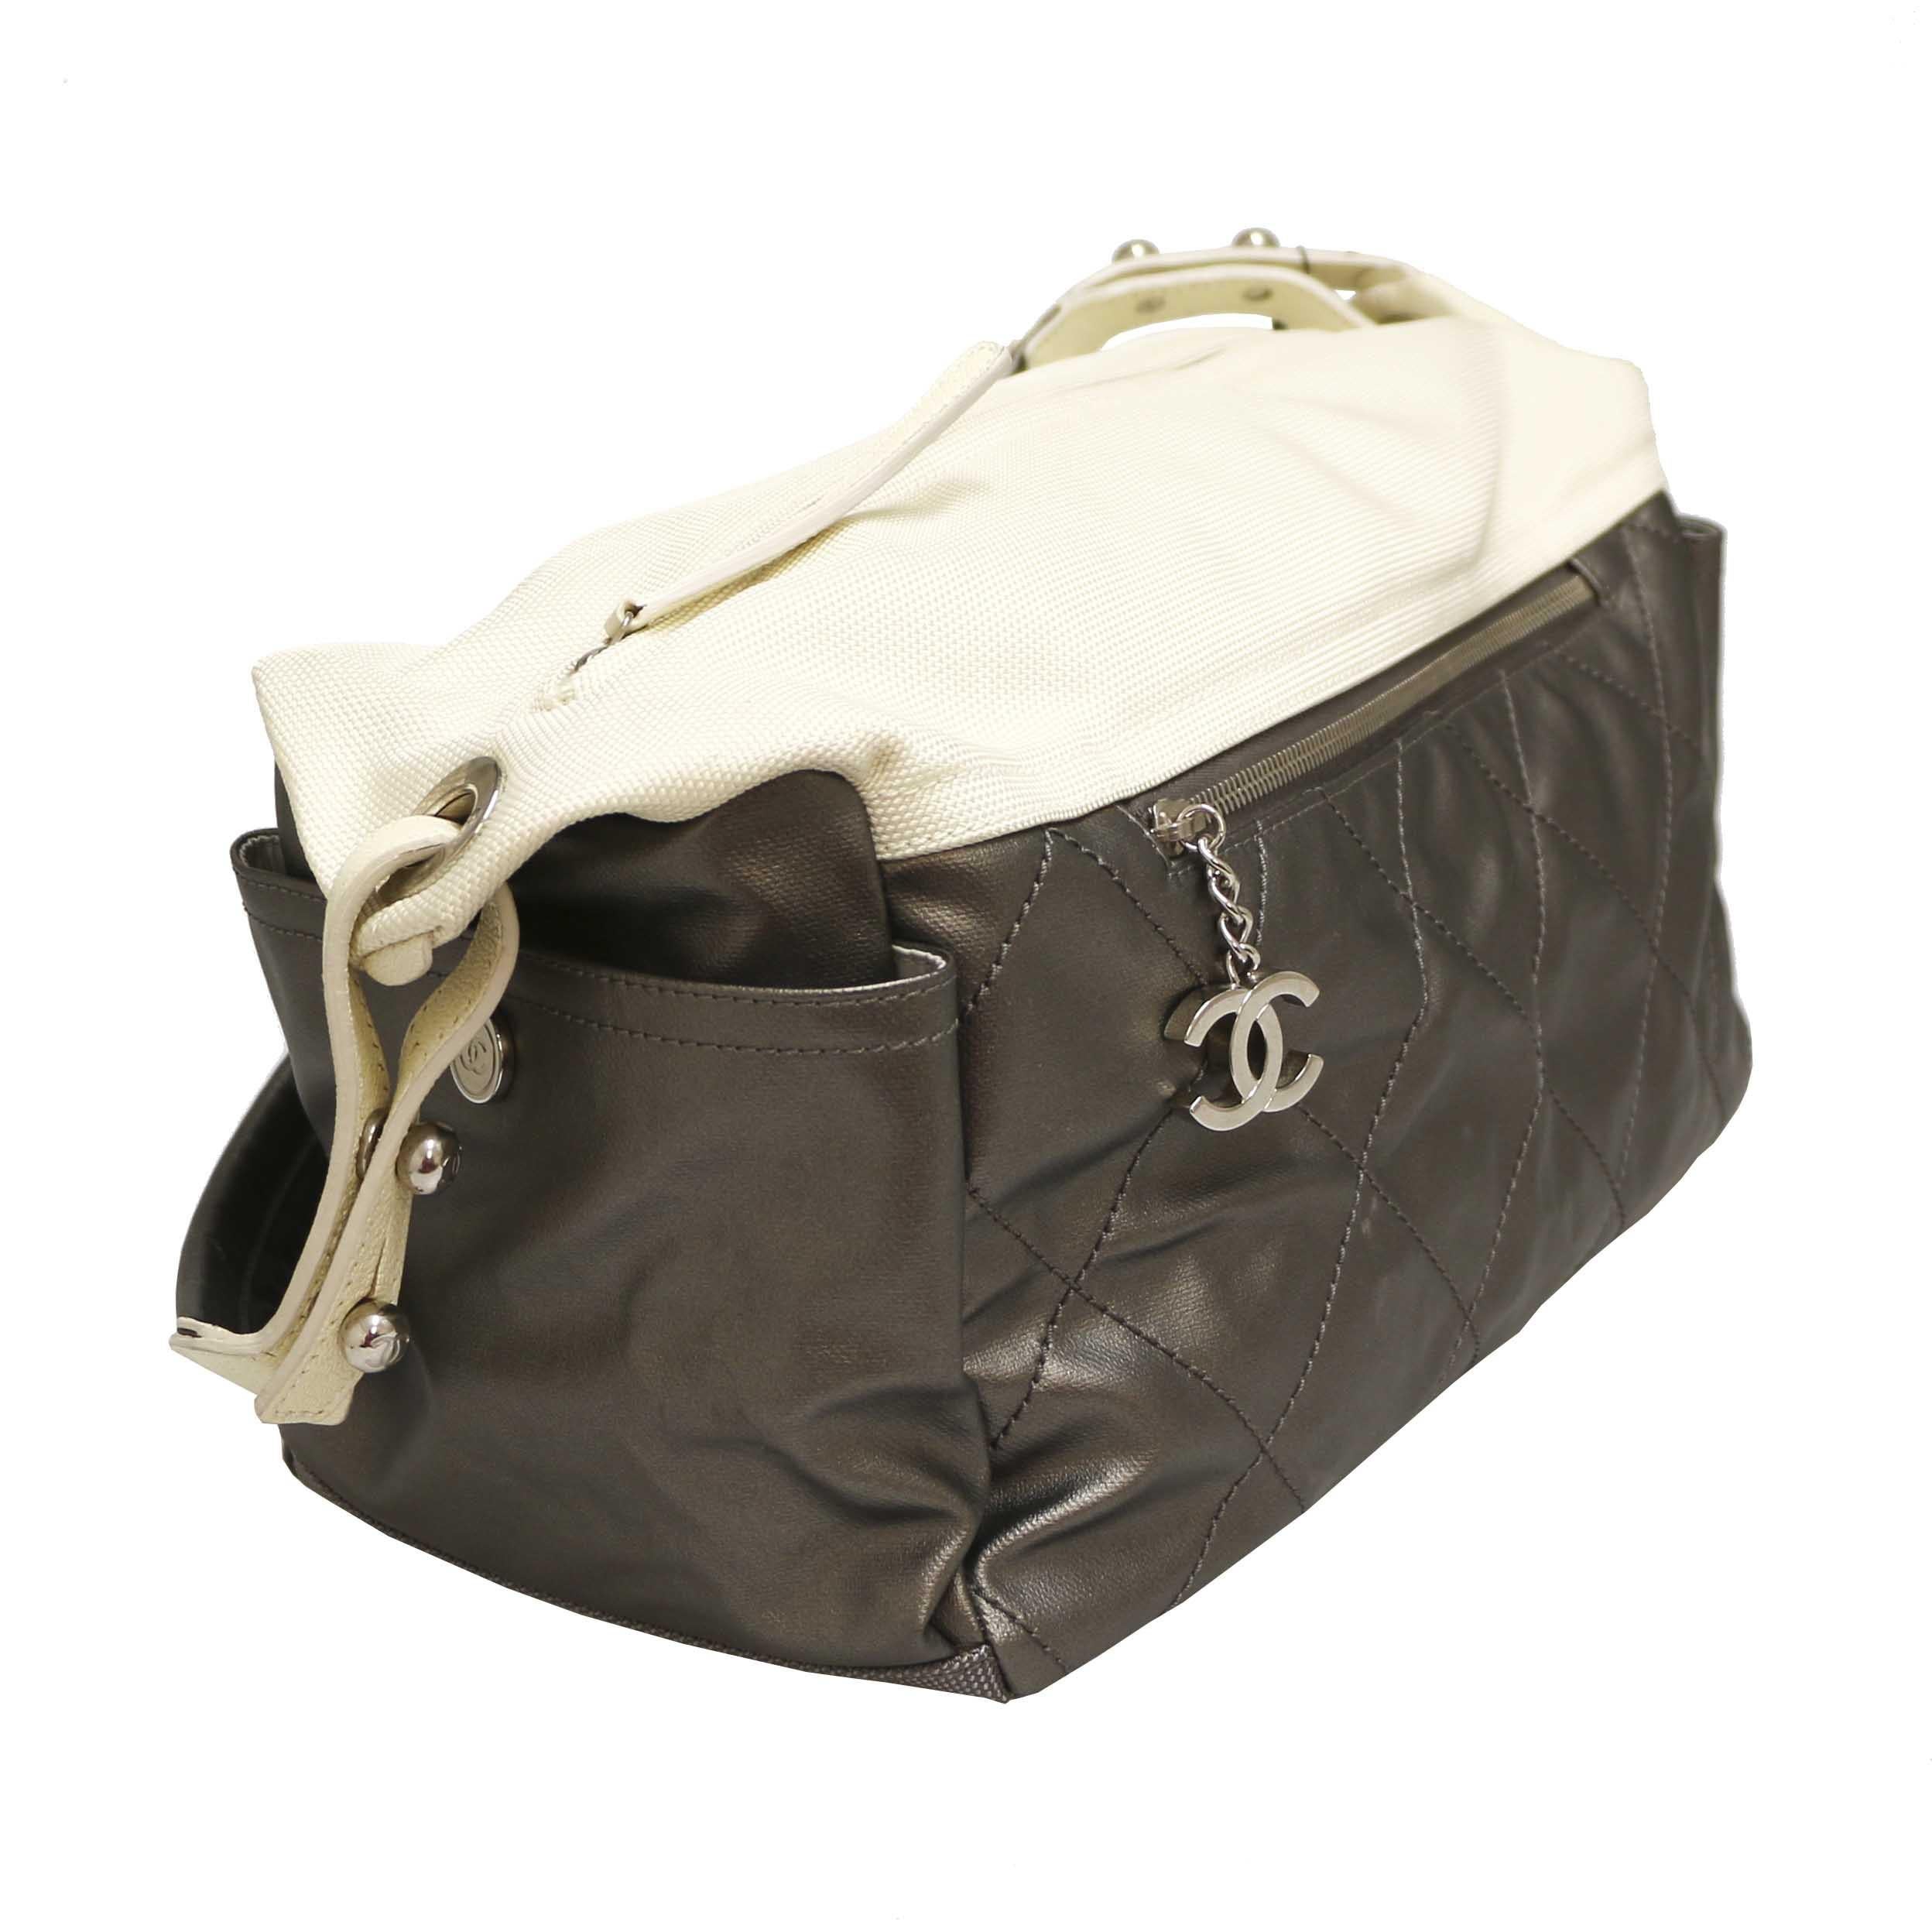 CHANEL Sport Bag in Two-Tone Color Canvas For Sale 5